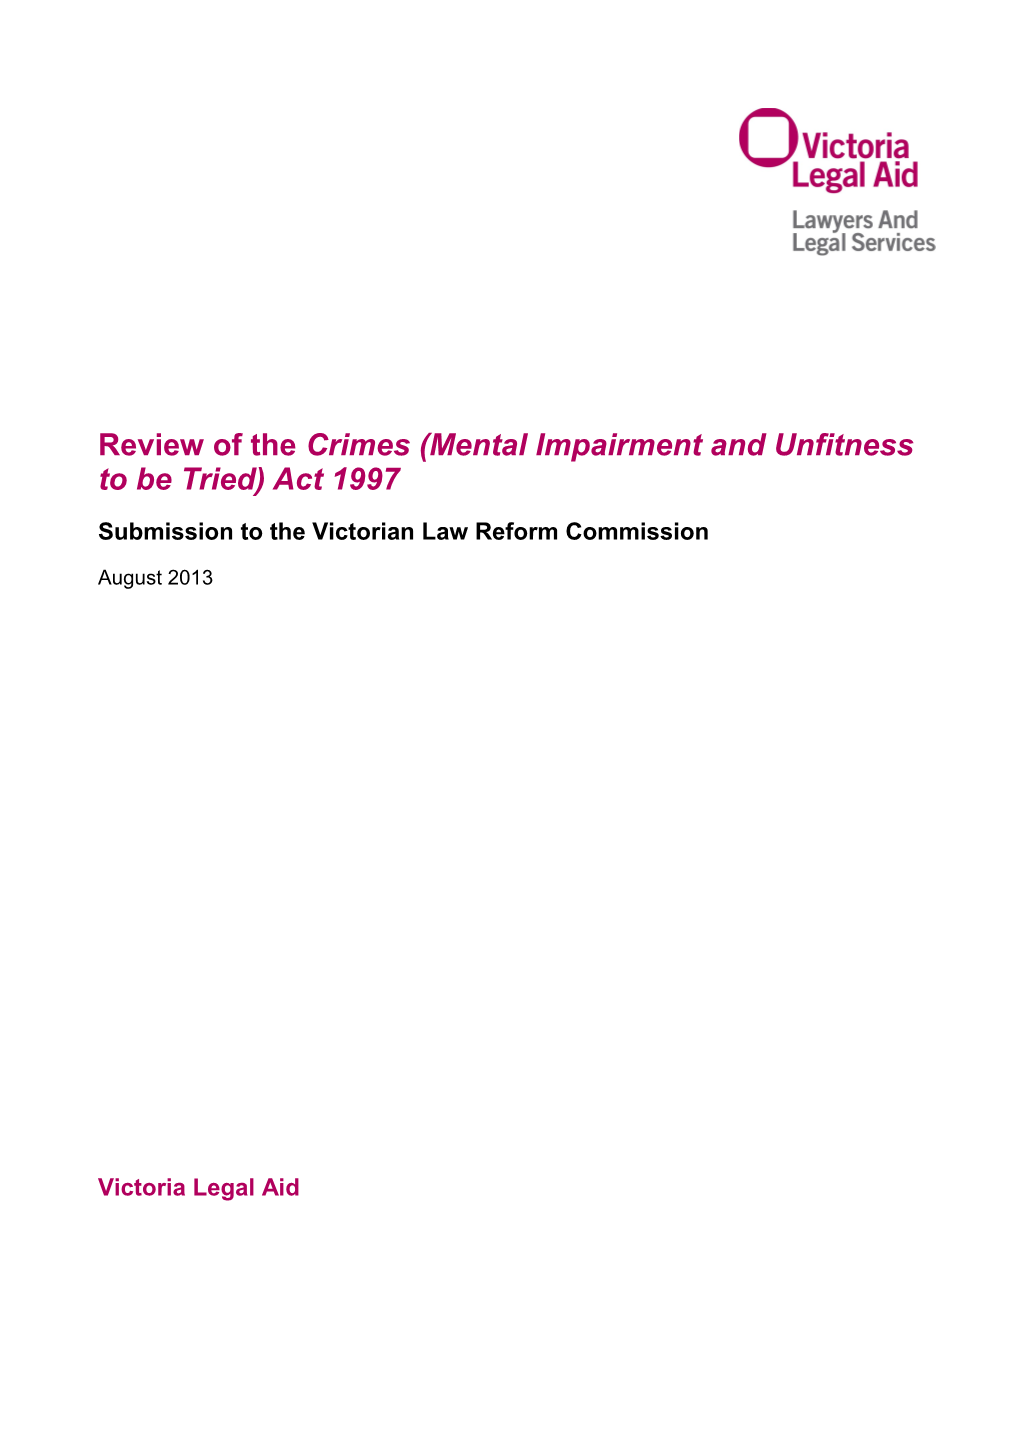 Review of the Crimes (Mental Impairment and Unfitness to Be Tried) Act 1997